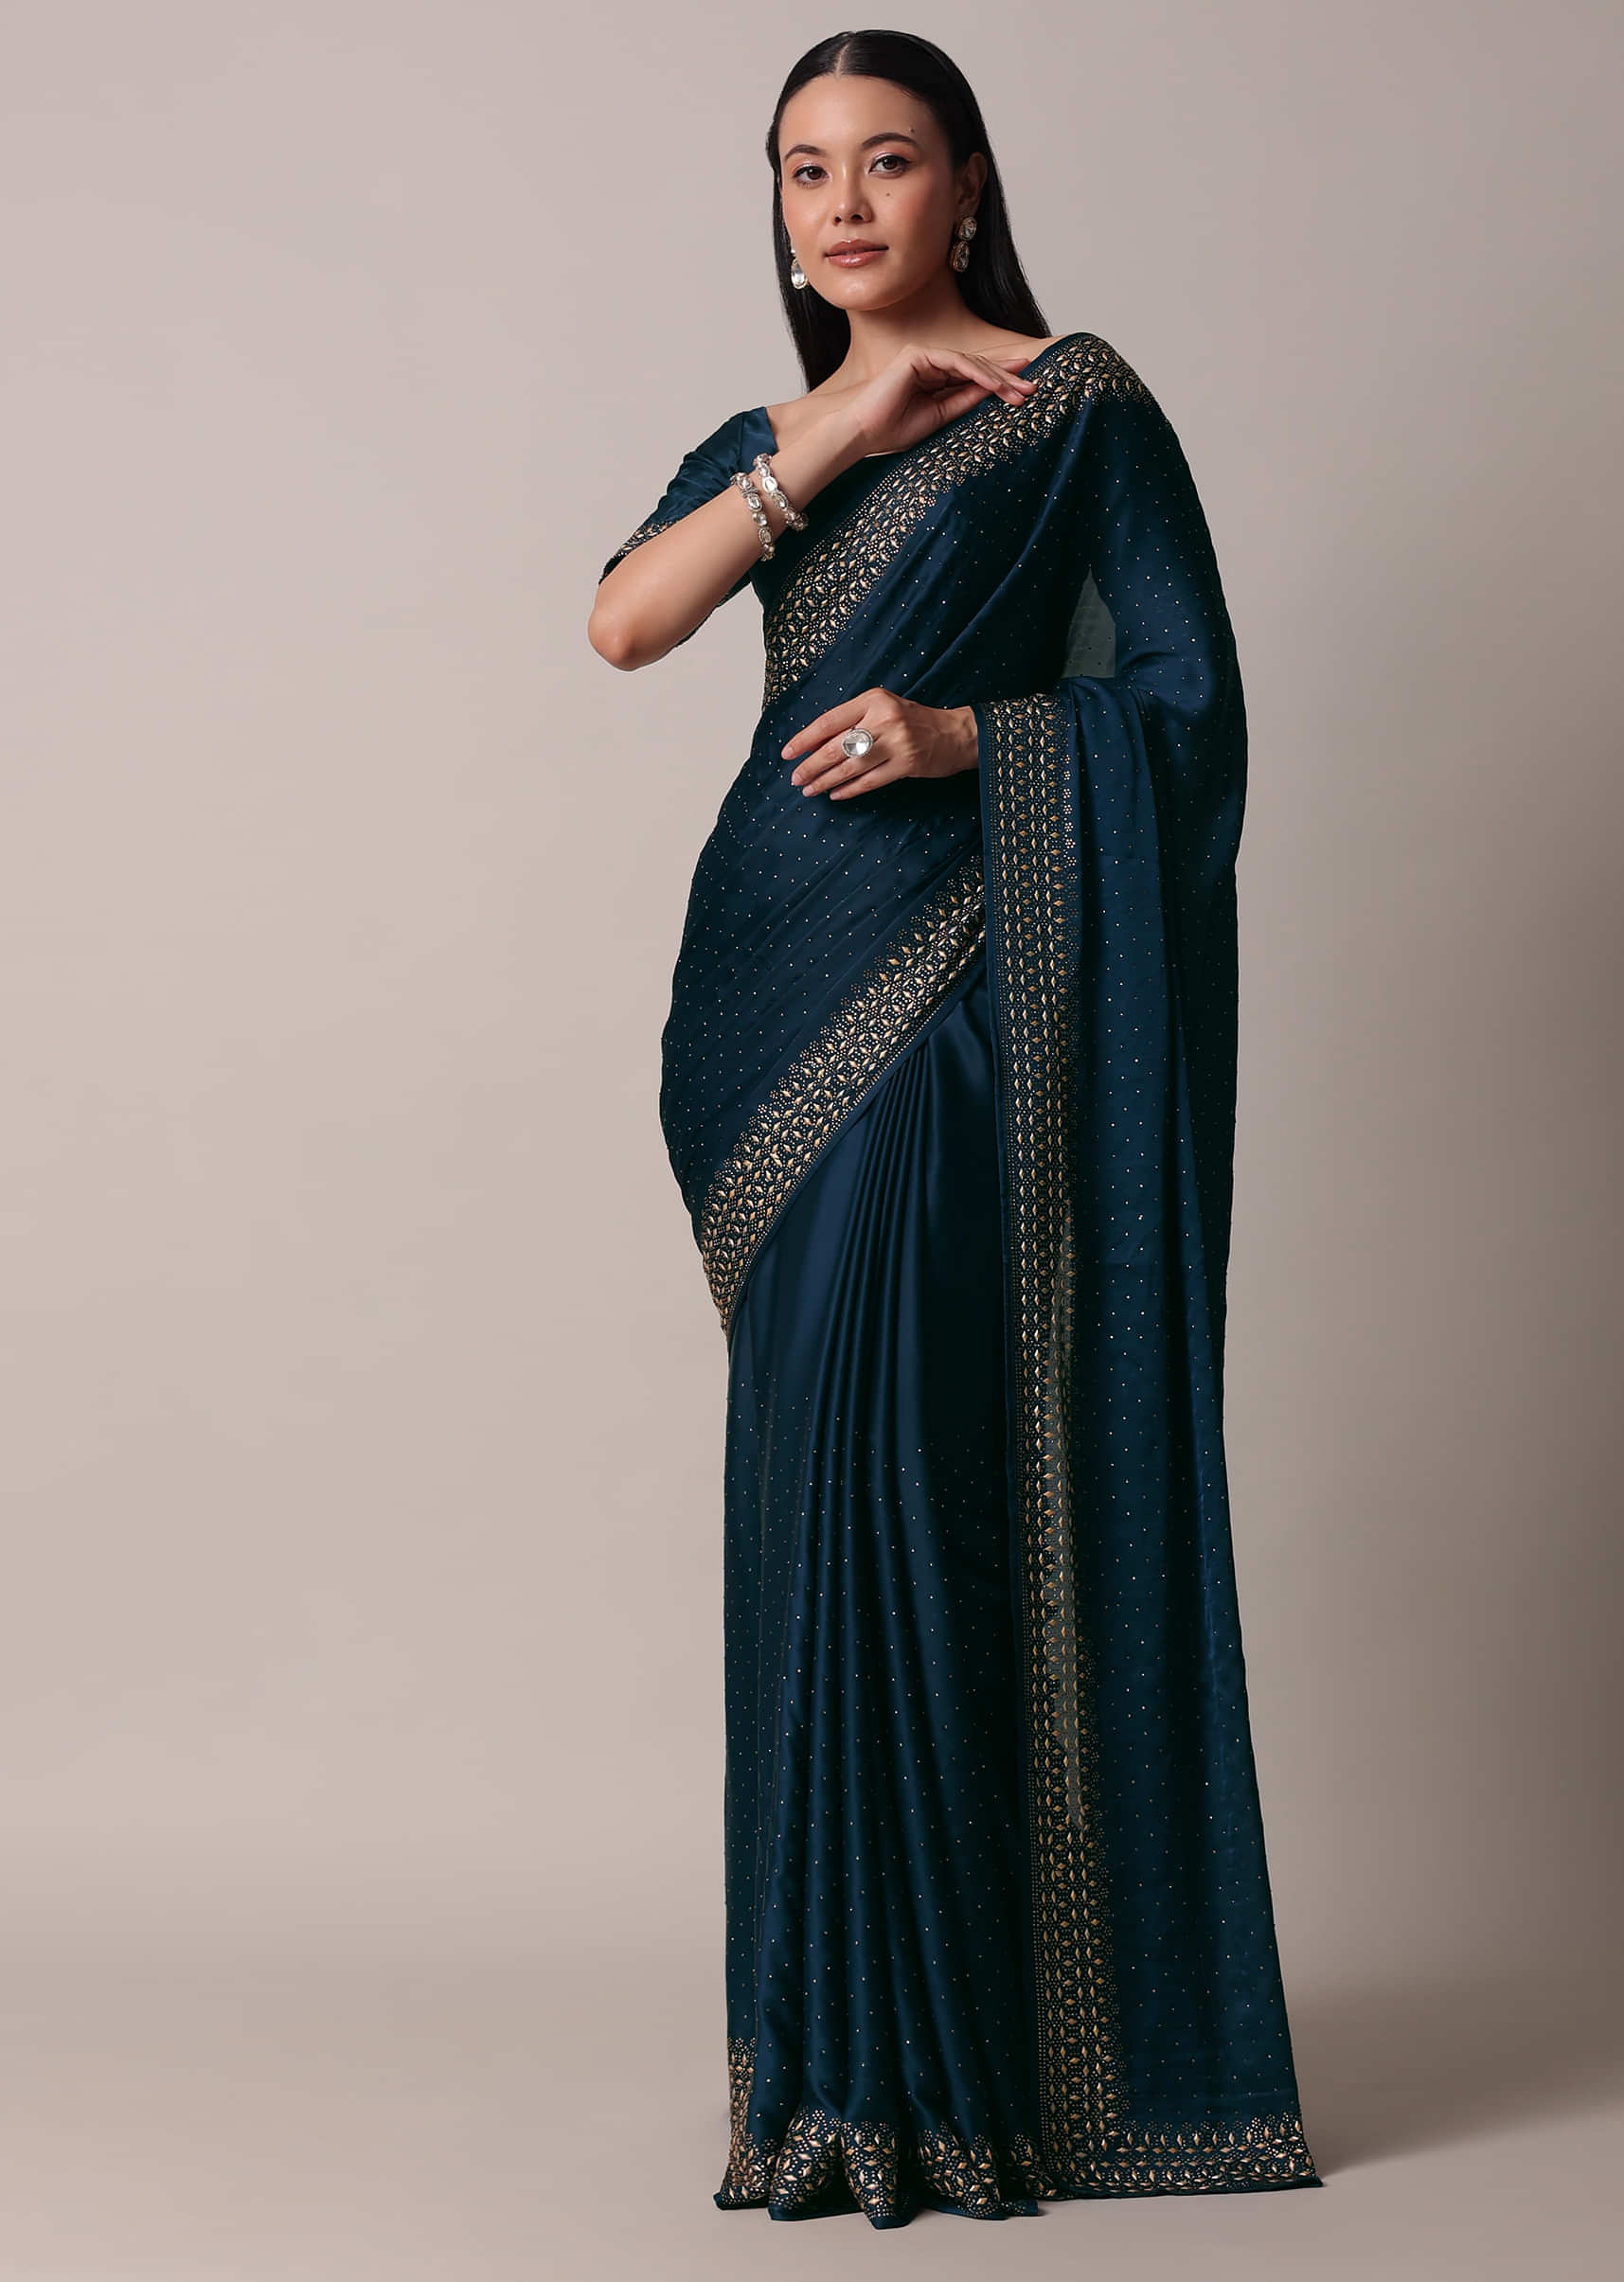 Buy Latest Party Wear Saree